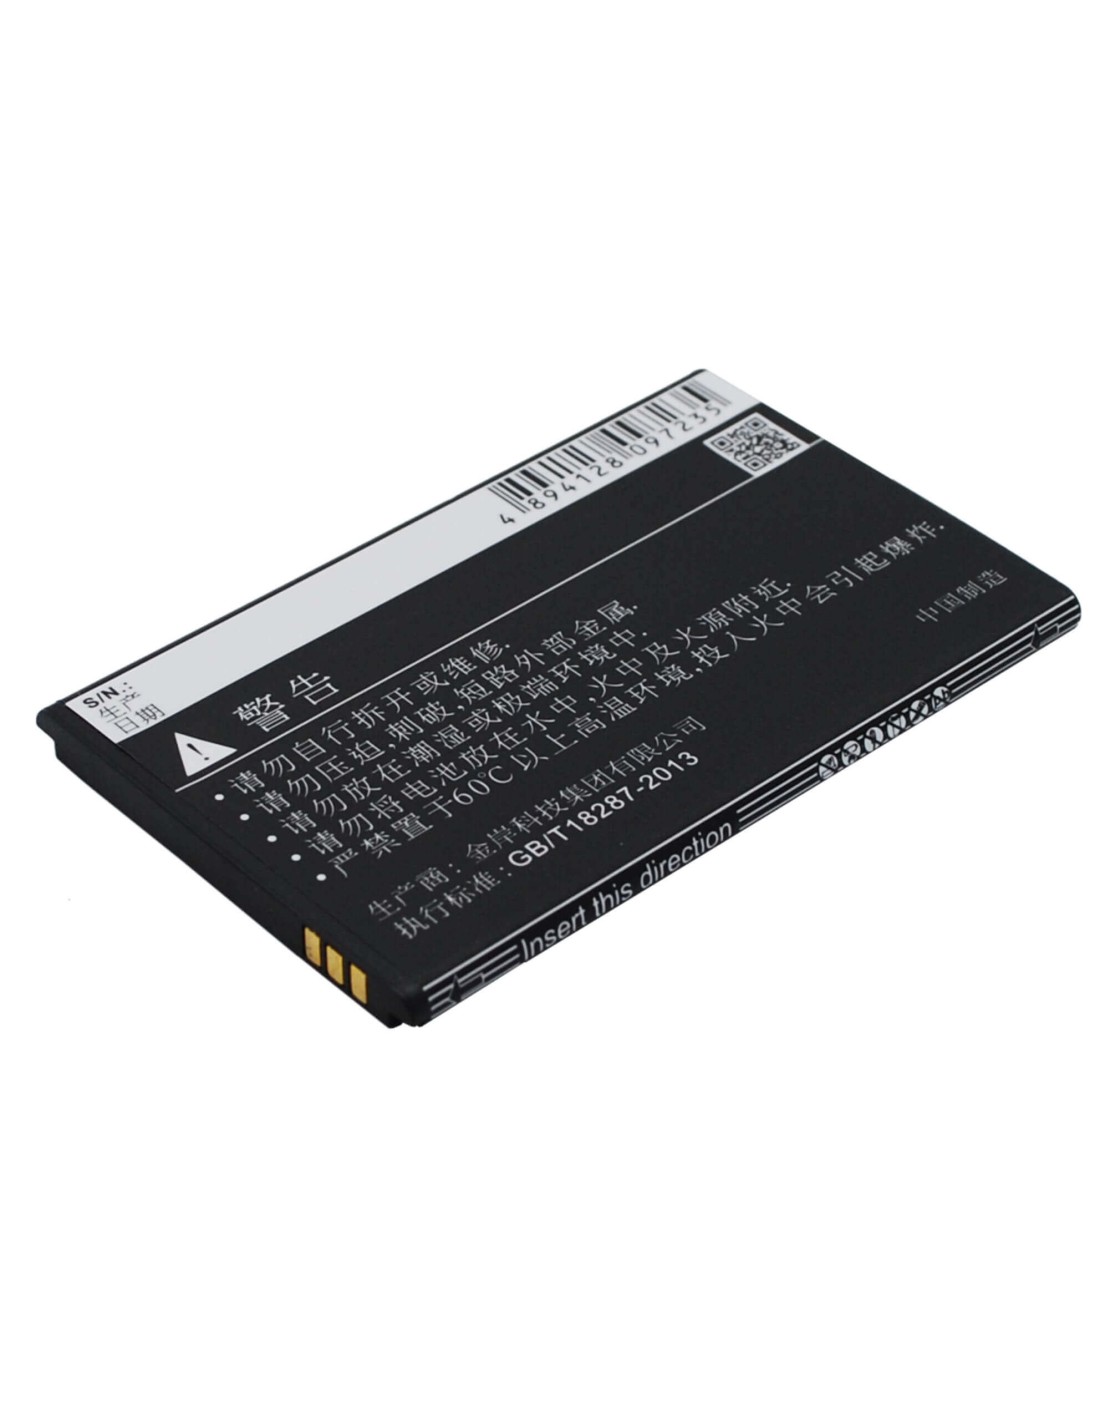 Battery for Coolpad 5010 3.7V, 1000mAh - 3.70Wh